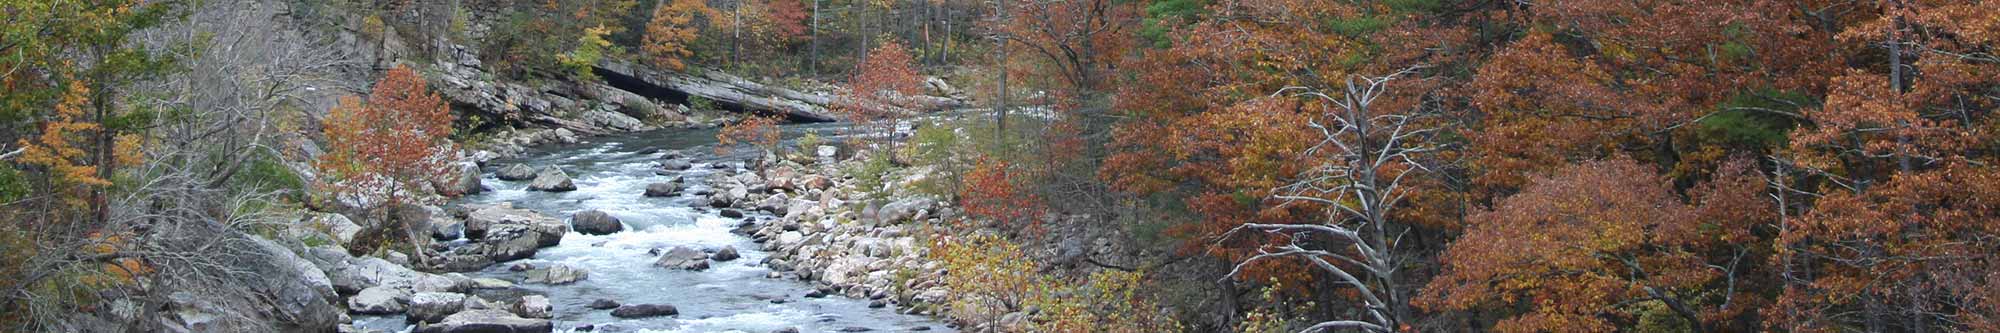 Fall Stream - Virginia Department of Forestry